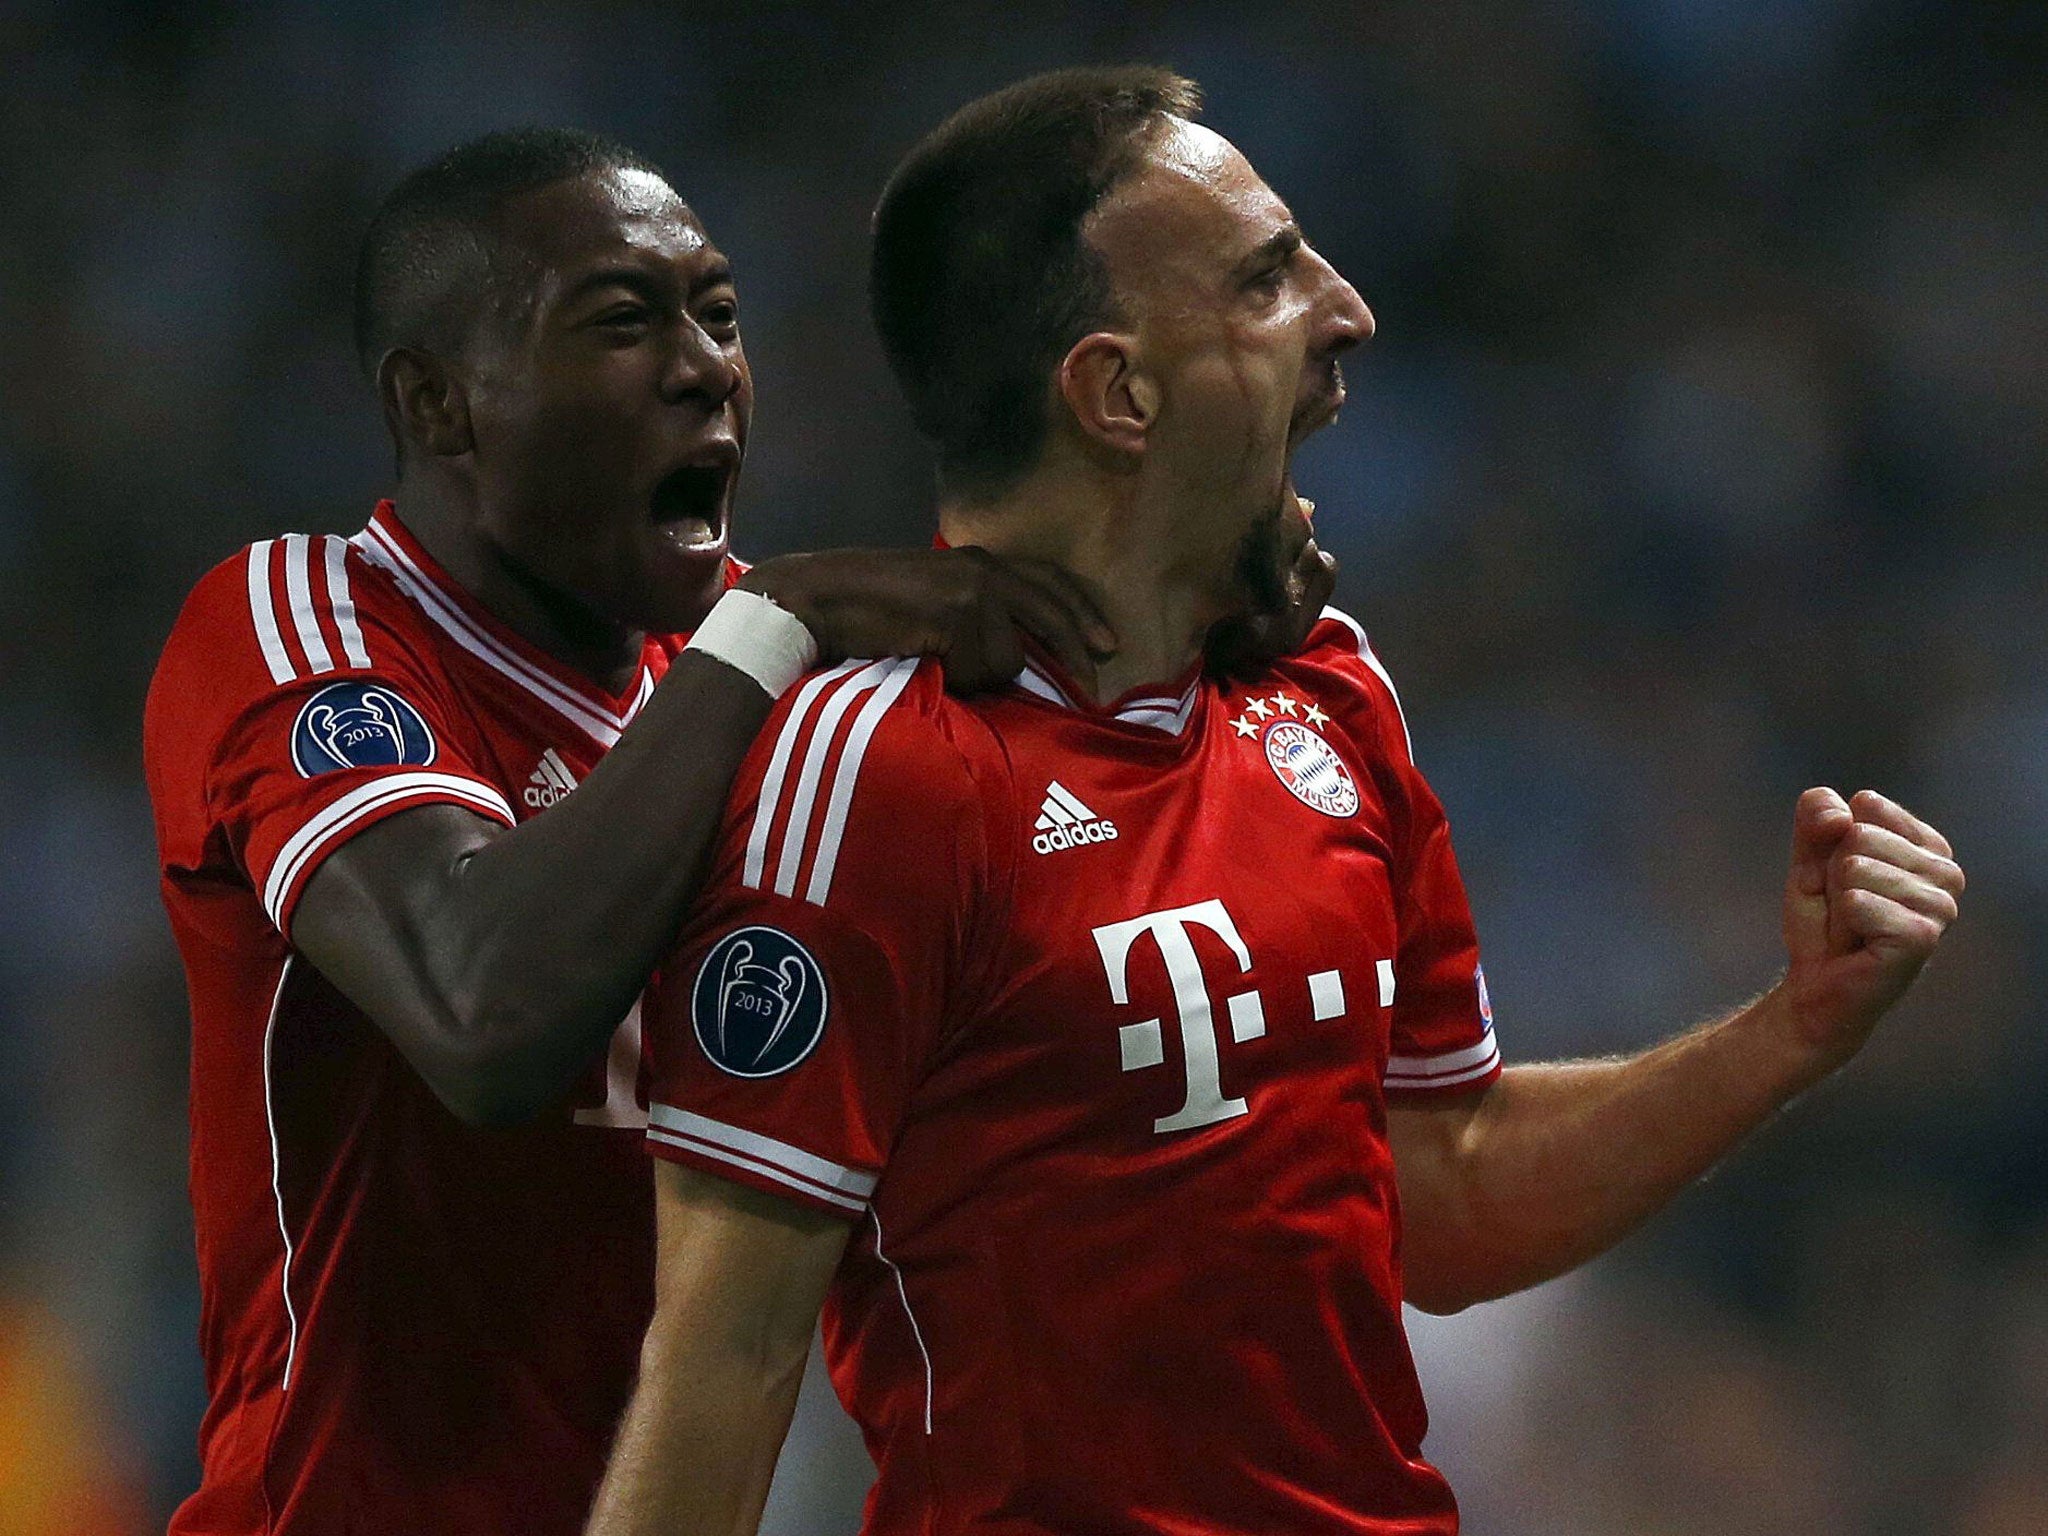 Bayern Munich's Franck Ribéry (right) is congratulated on scoring against Manchester City by team-mate David Alaba